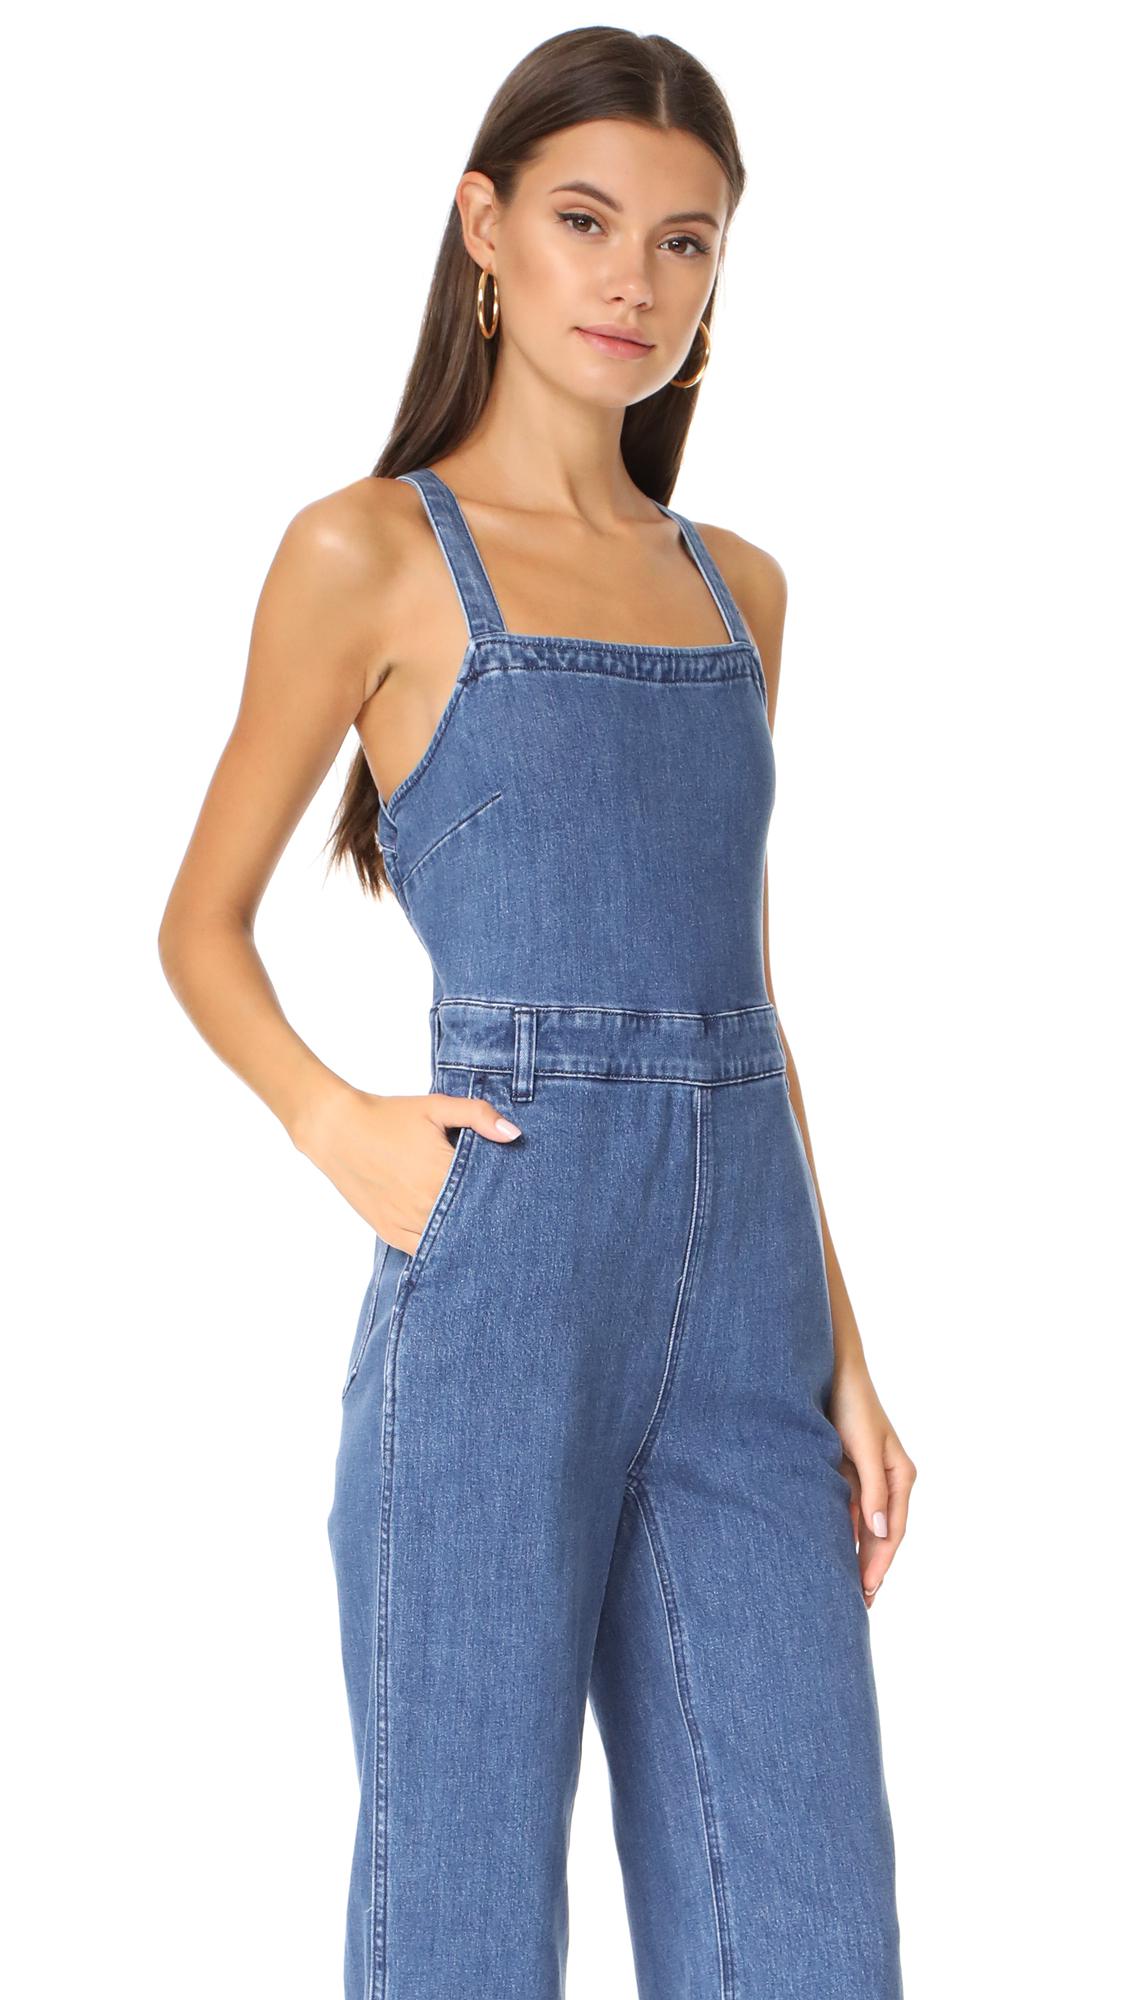 Madewell Denim Lace Up Back Jumpsuit in Blue - Lyst